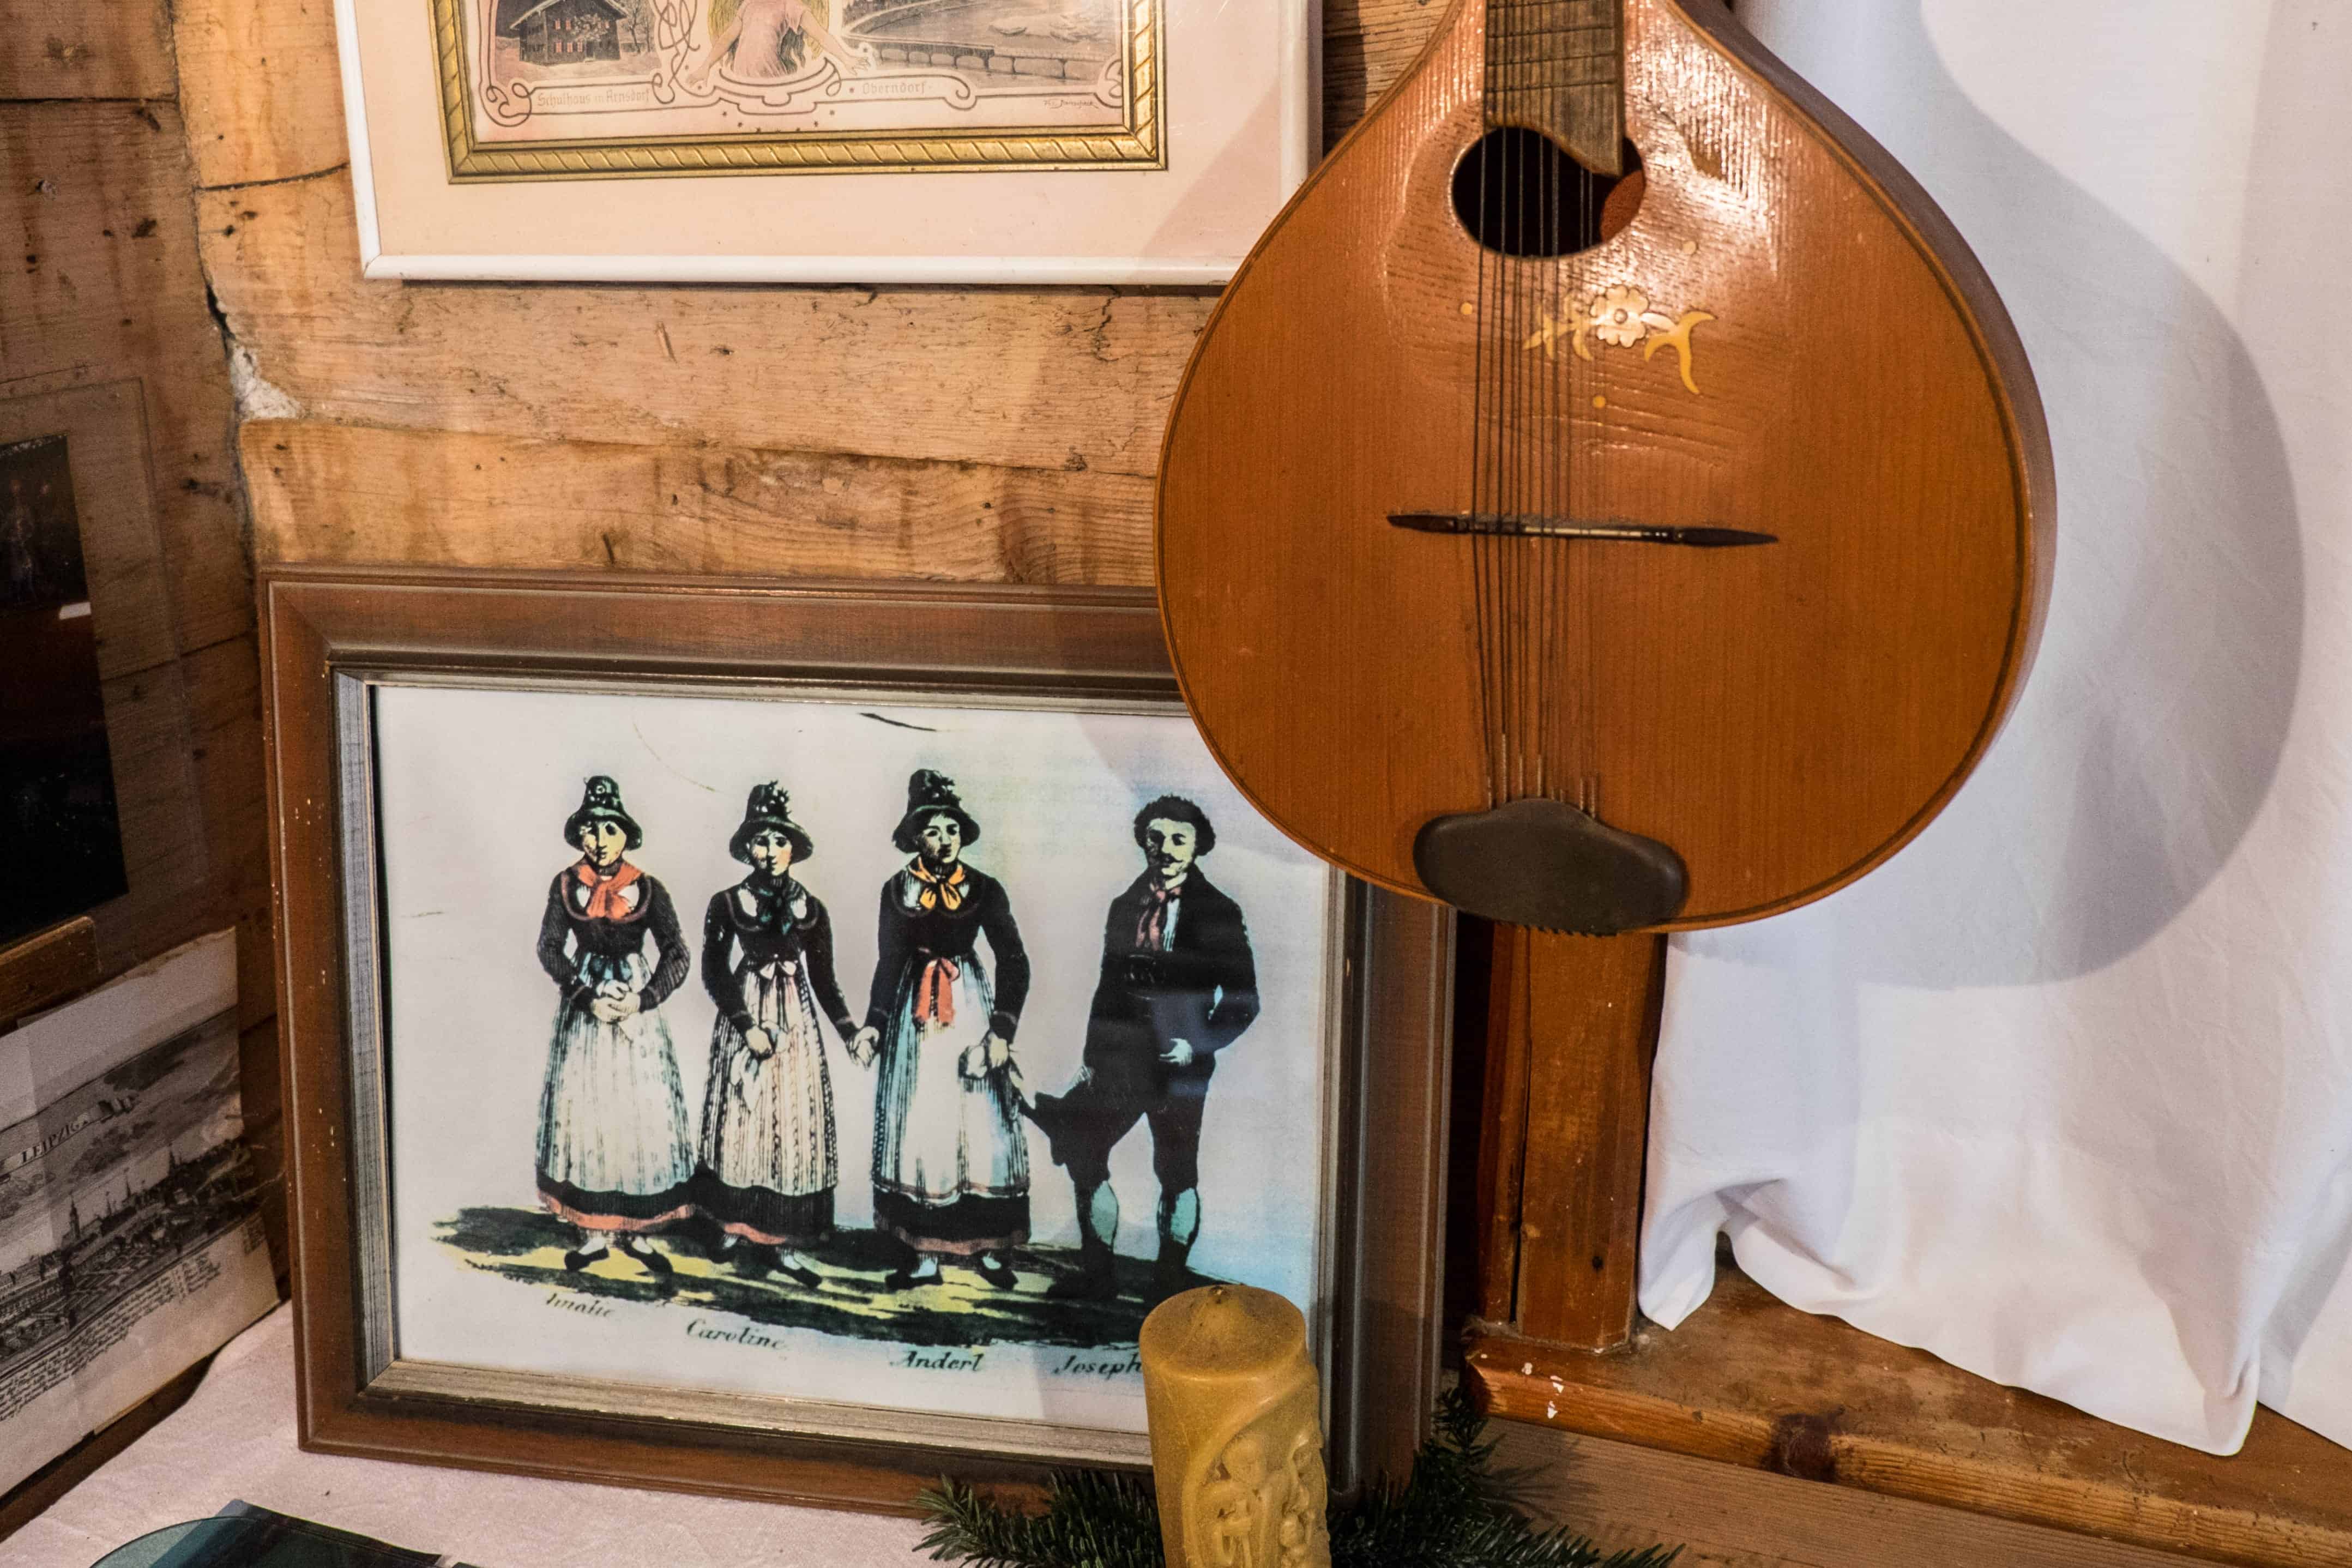 Exhibits from Silent Night Strasser Family Singers House in Tirol Austria 